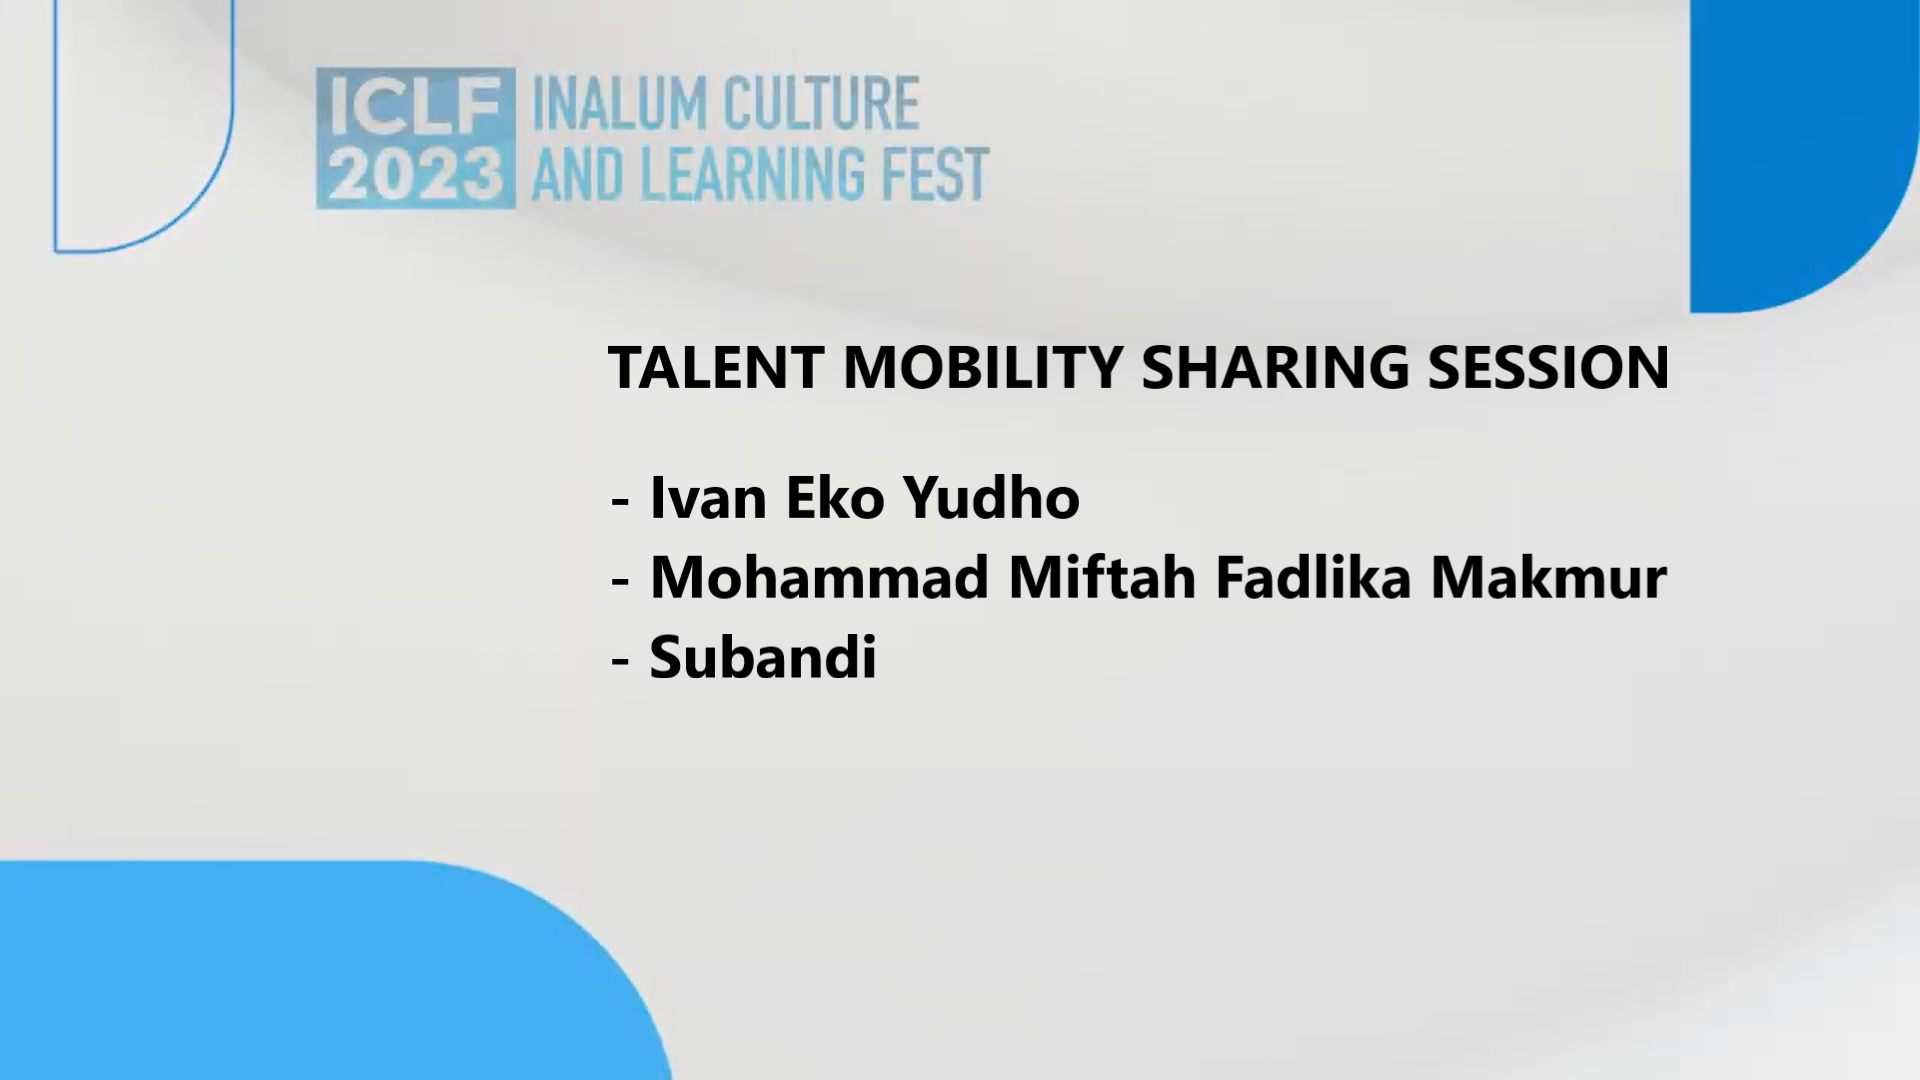 ICLF 2023 - Talent Mobility Sharing Session